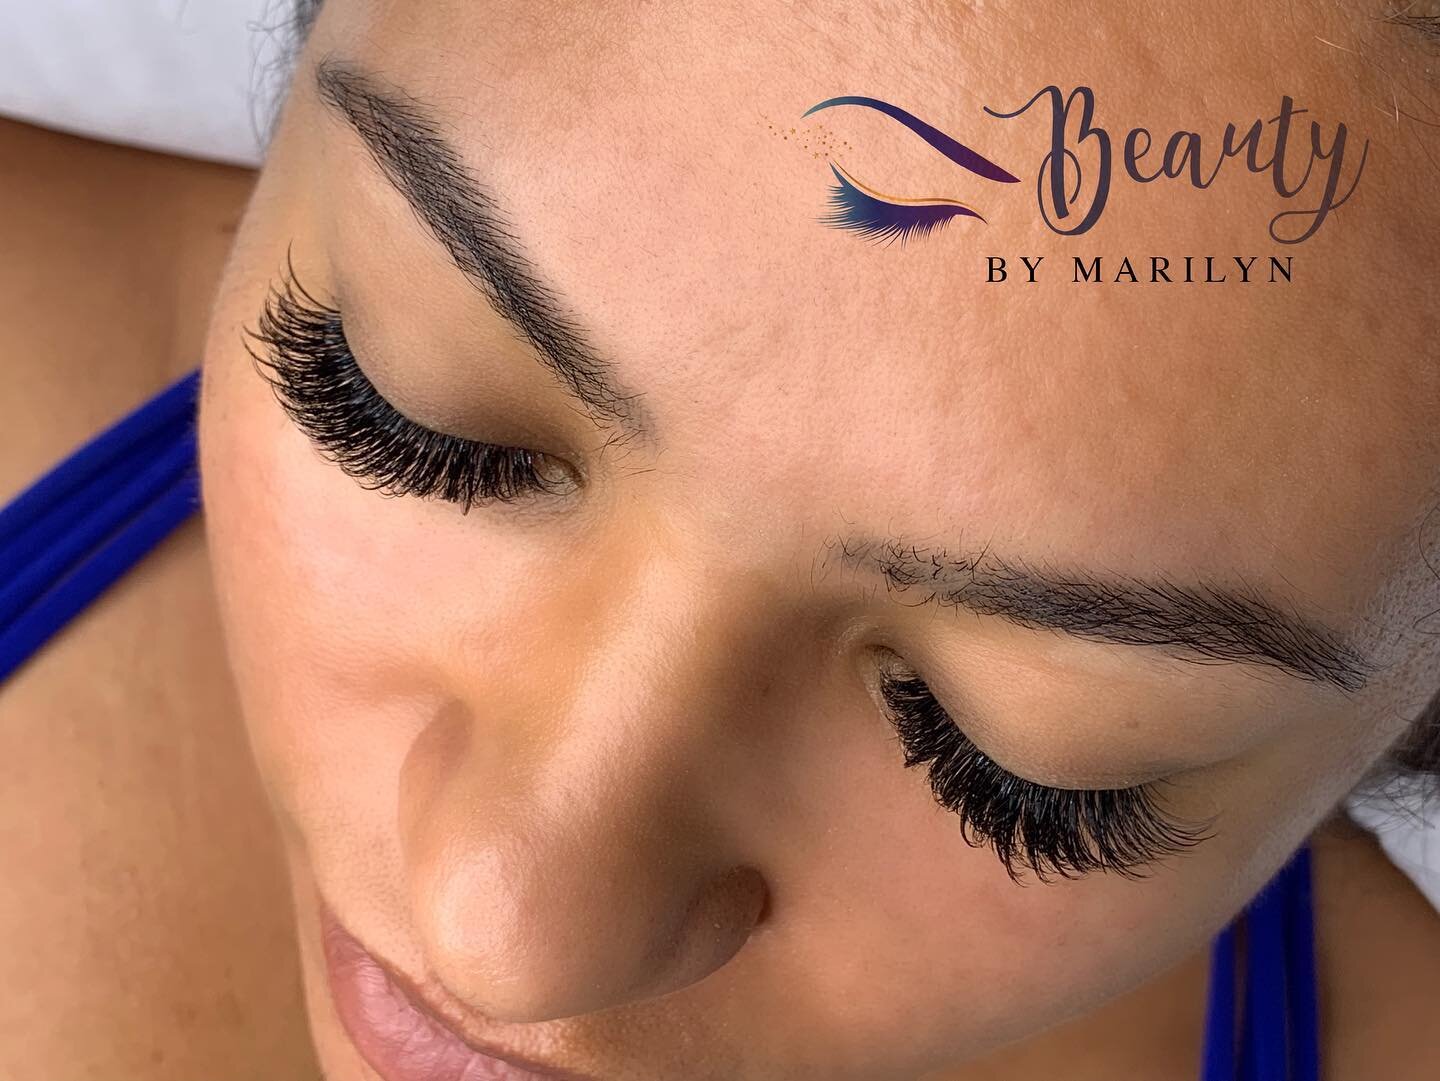 🦋🦋 I love how fluffy they look! This is Russian volume in a strip lash style. #lashextensions